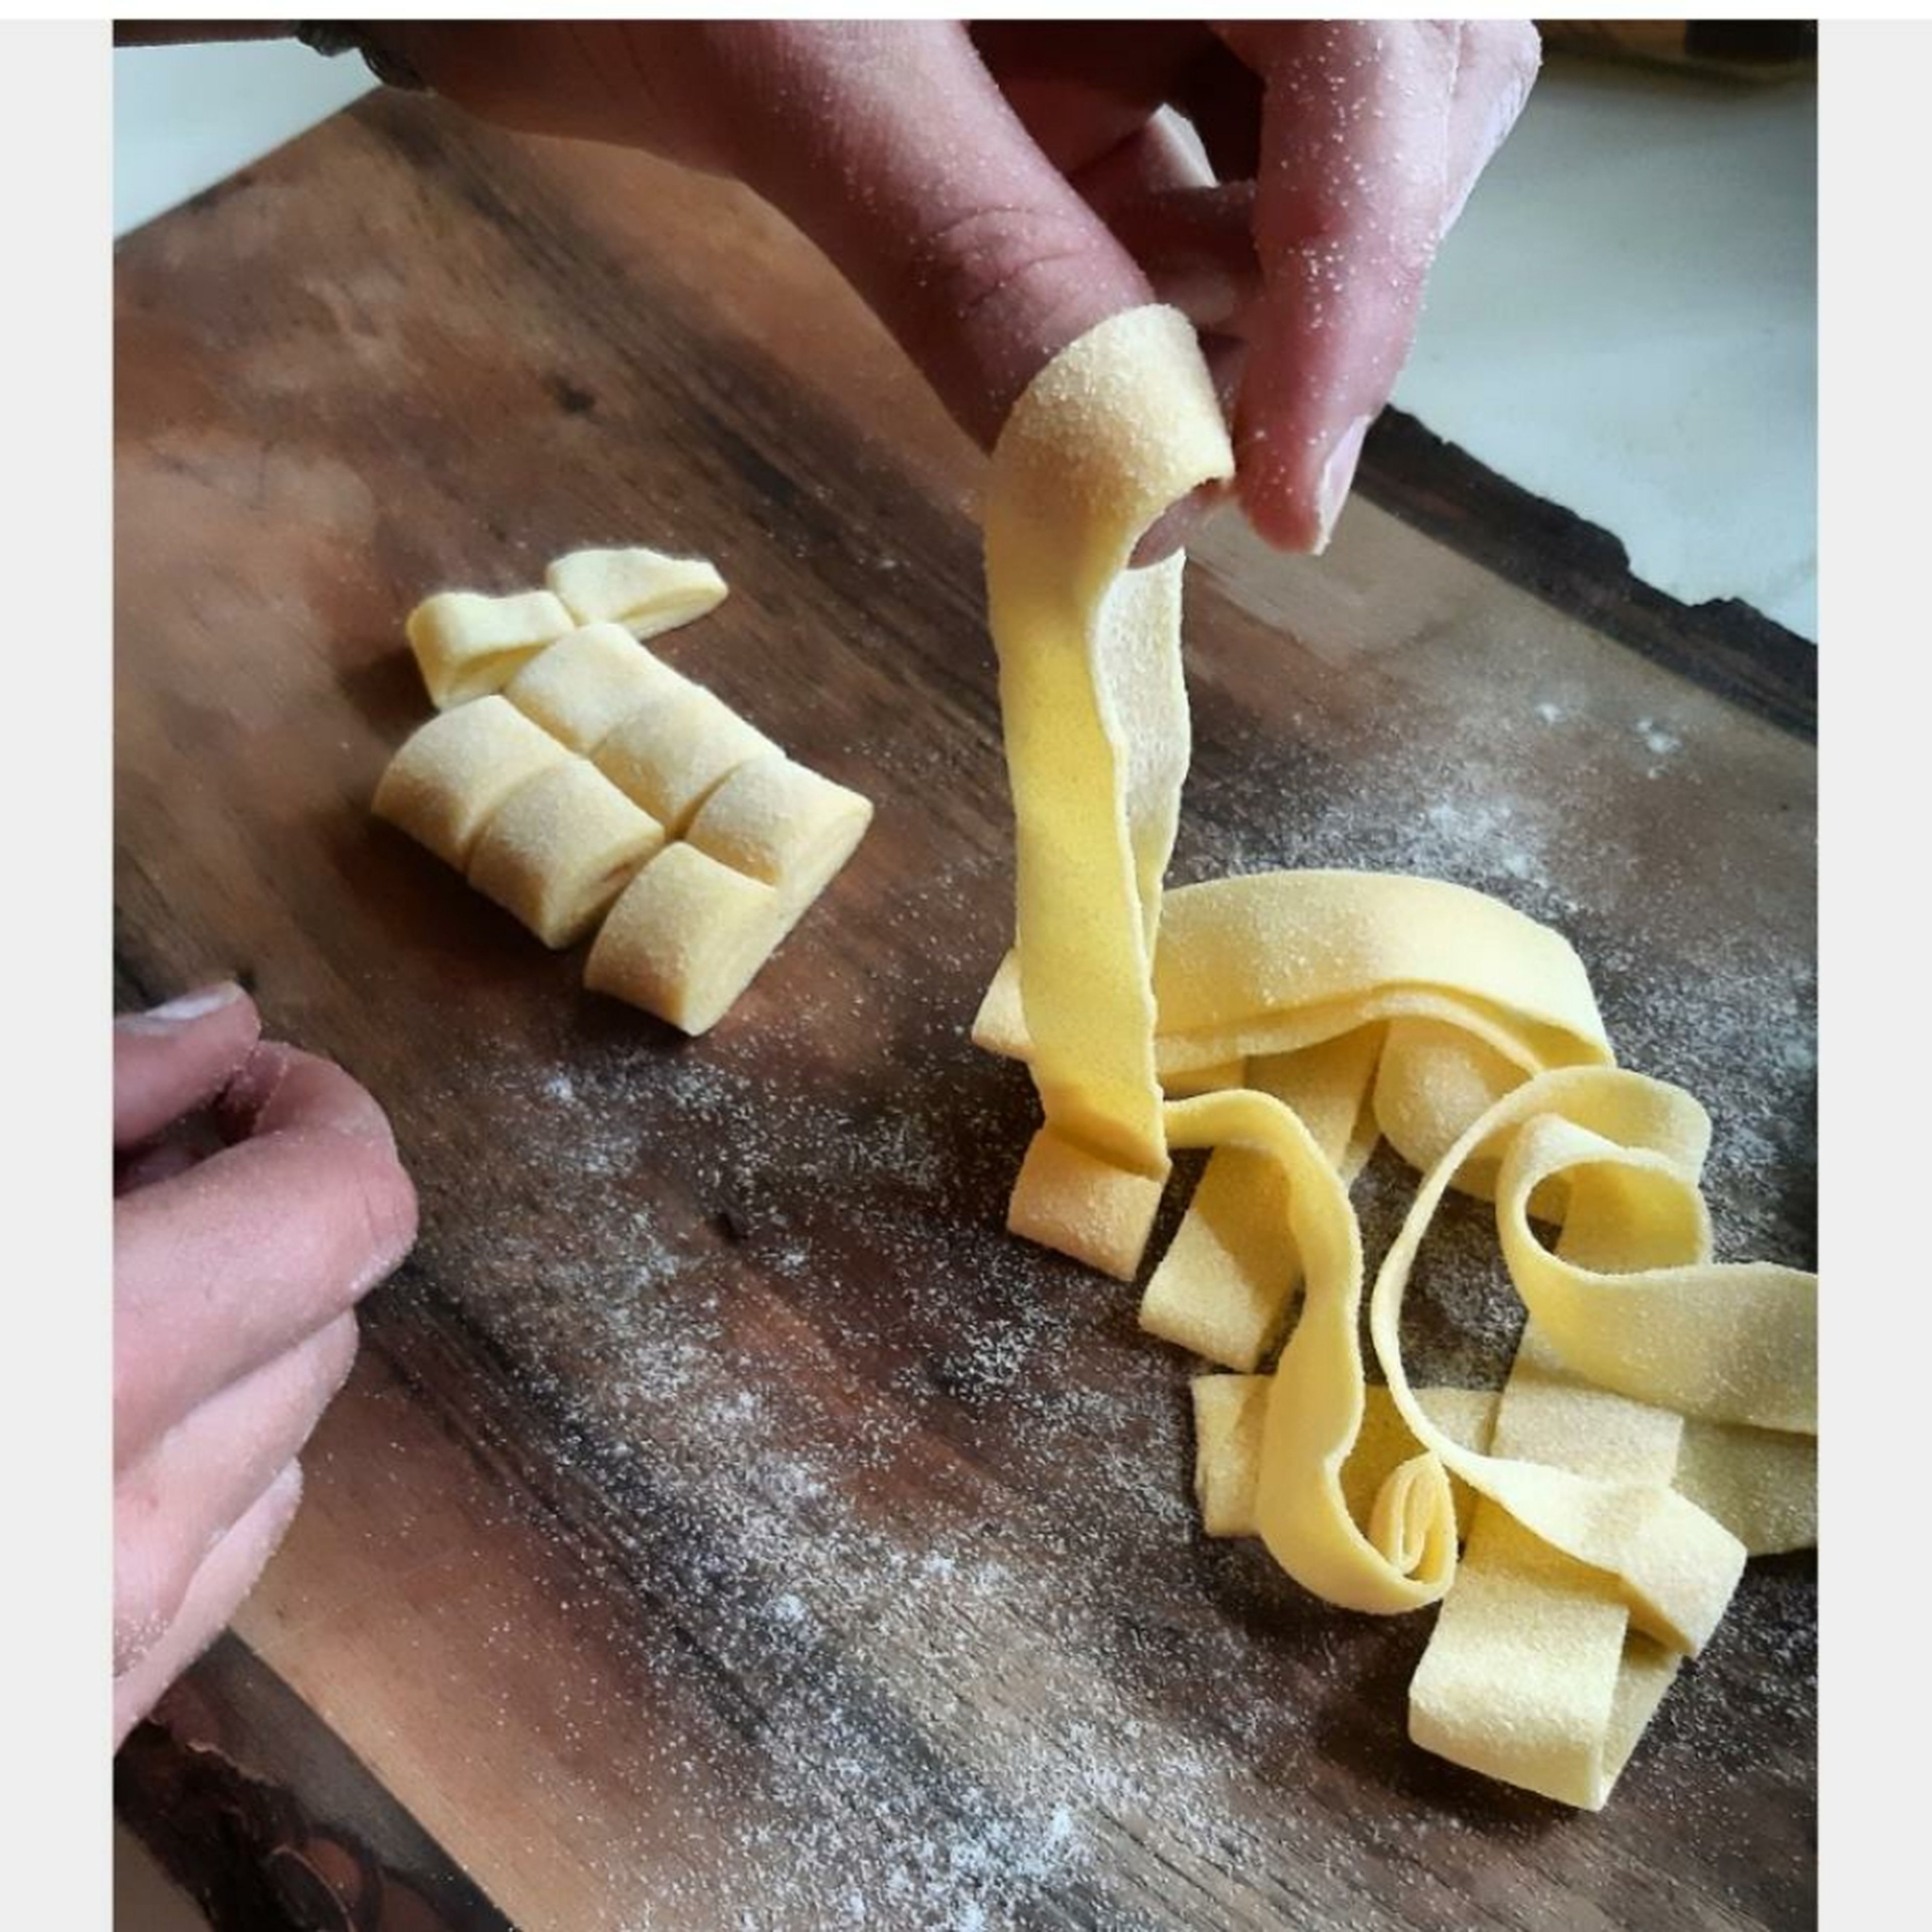 Cut the pasta the shape you prefer. In this case I choose pappardelle, perfect for meat based sauce as Bolognese or Duck ragout.